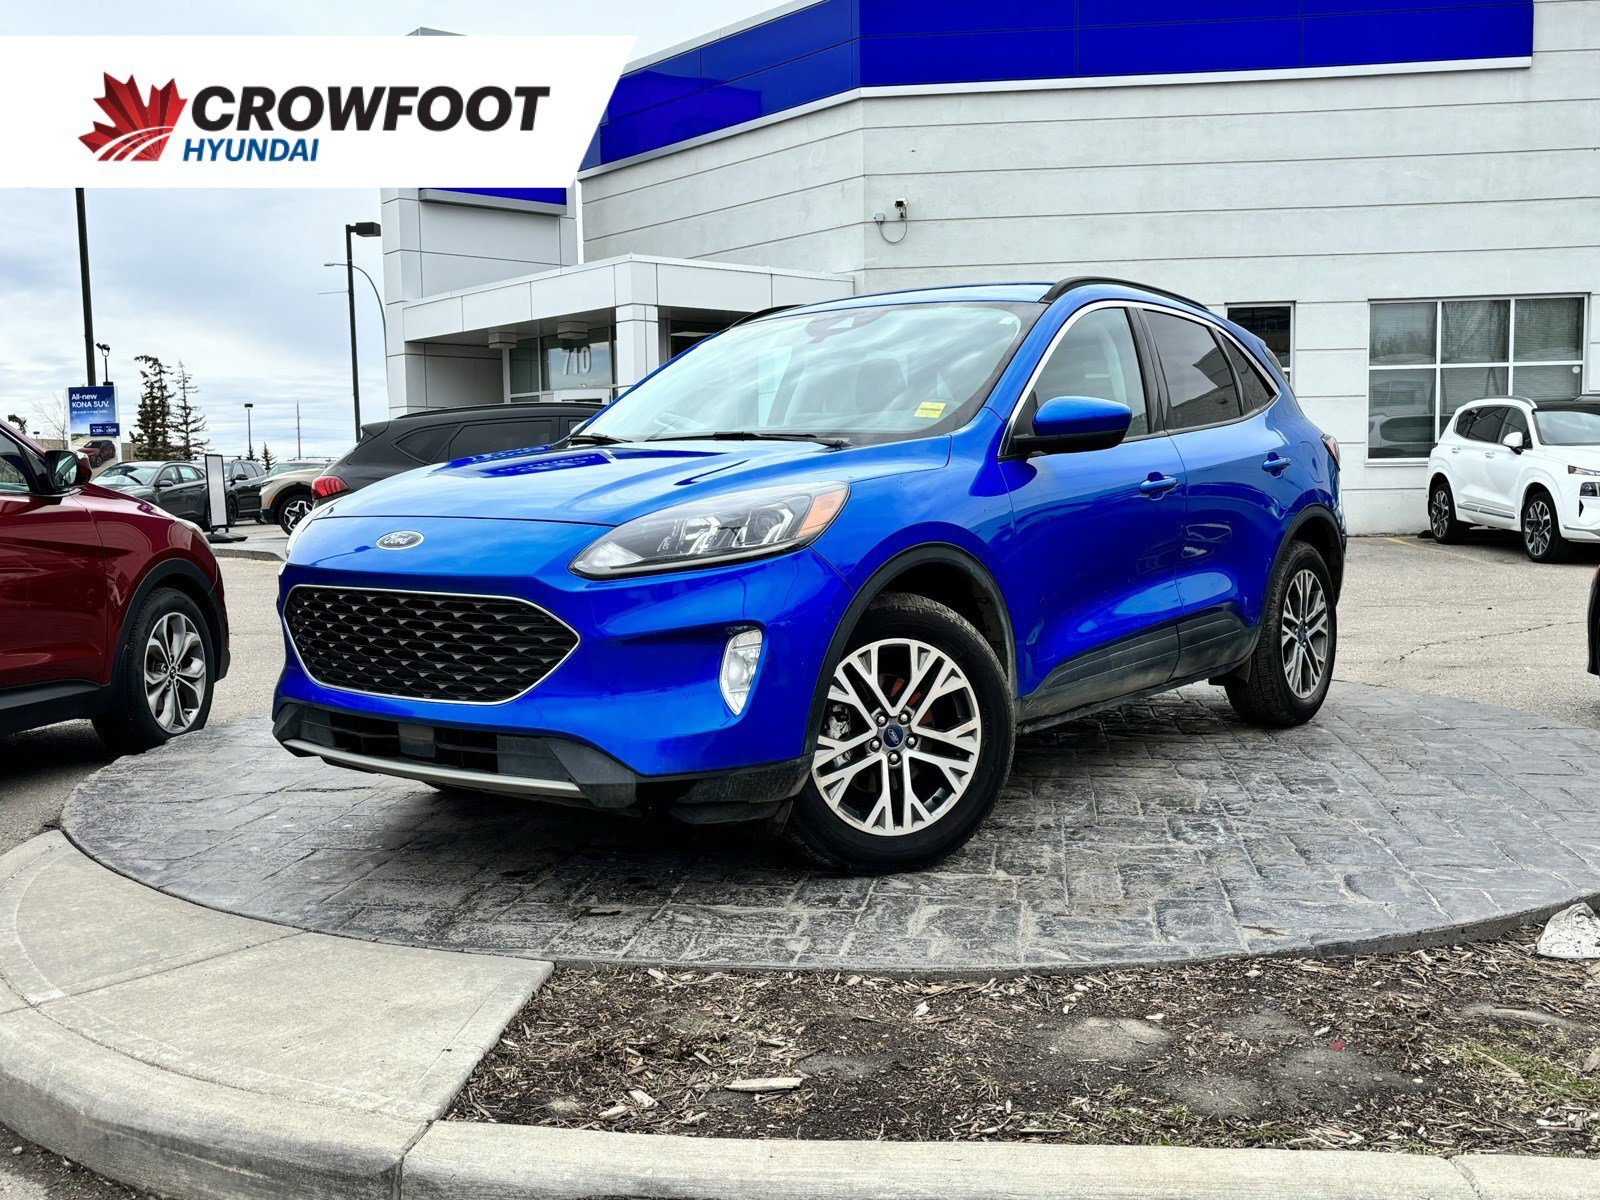 2021 Ford Escape SEL - 4WD, No Accidents, Blind Spot Monitor, 2 Key